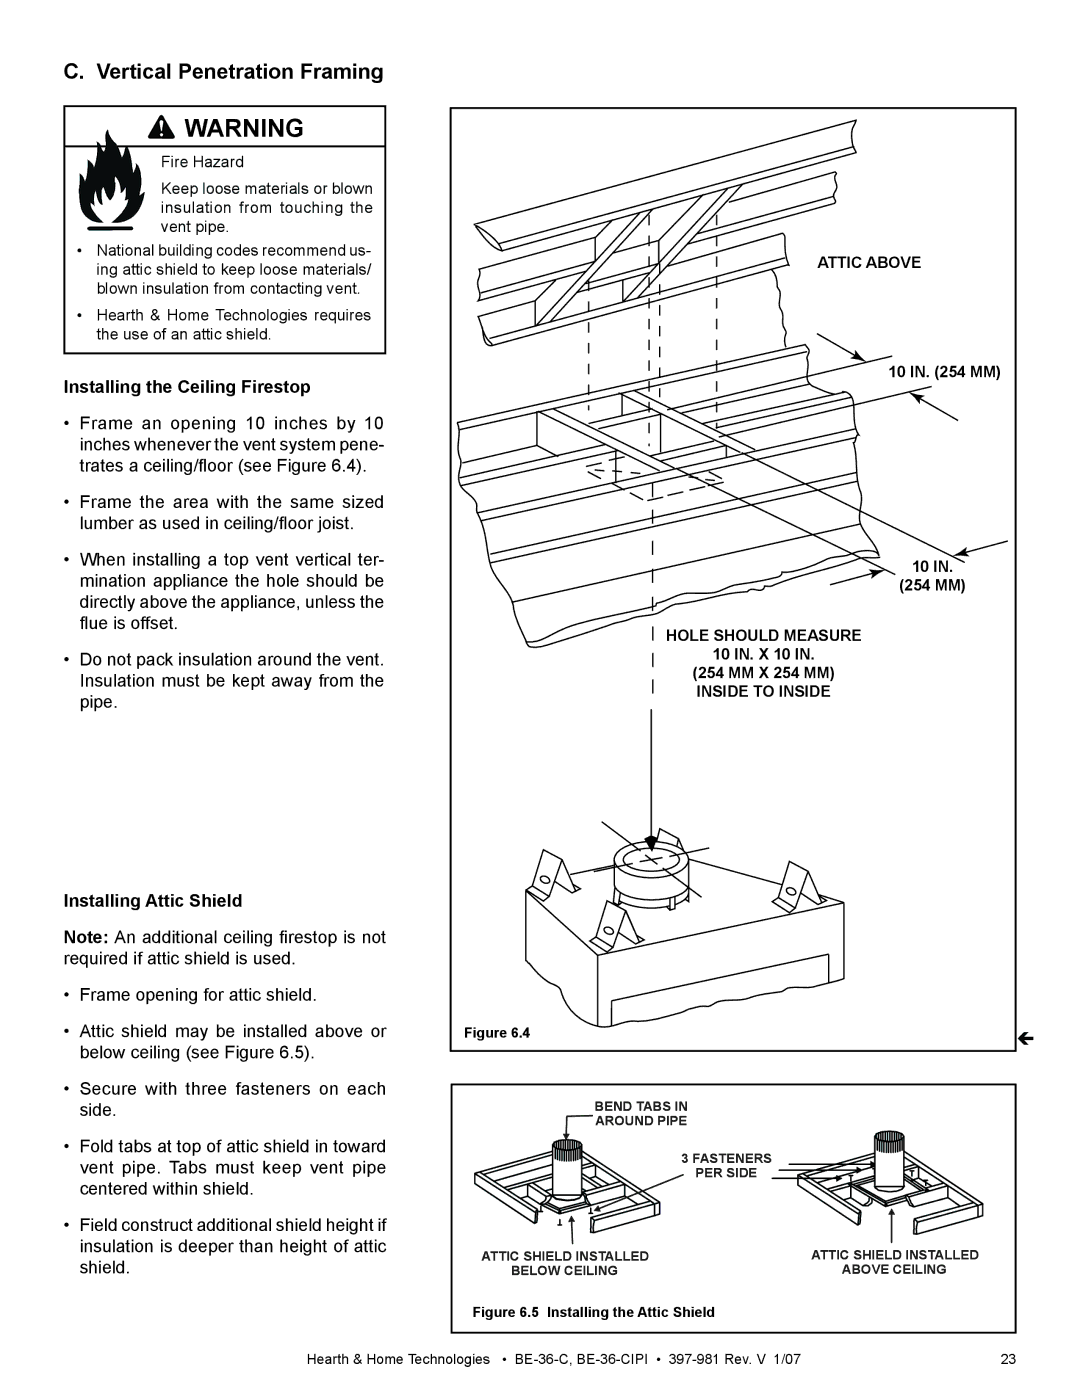 Hearth and Home Technologies BE-36-C manual Vertical Penetration Framing, Installing the Ceiling Firestop, 10 IN. X 10 